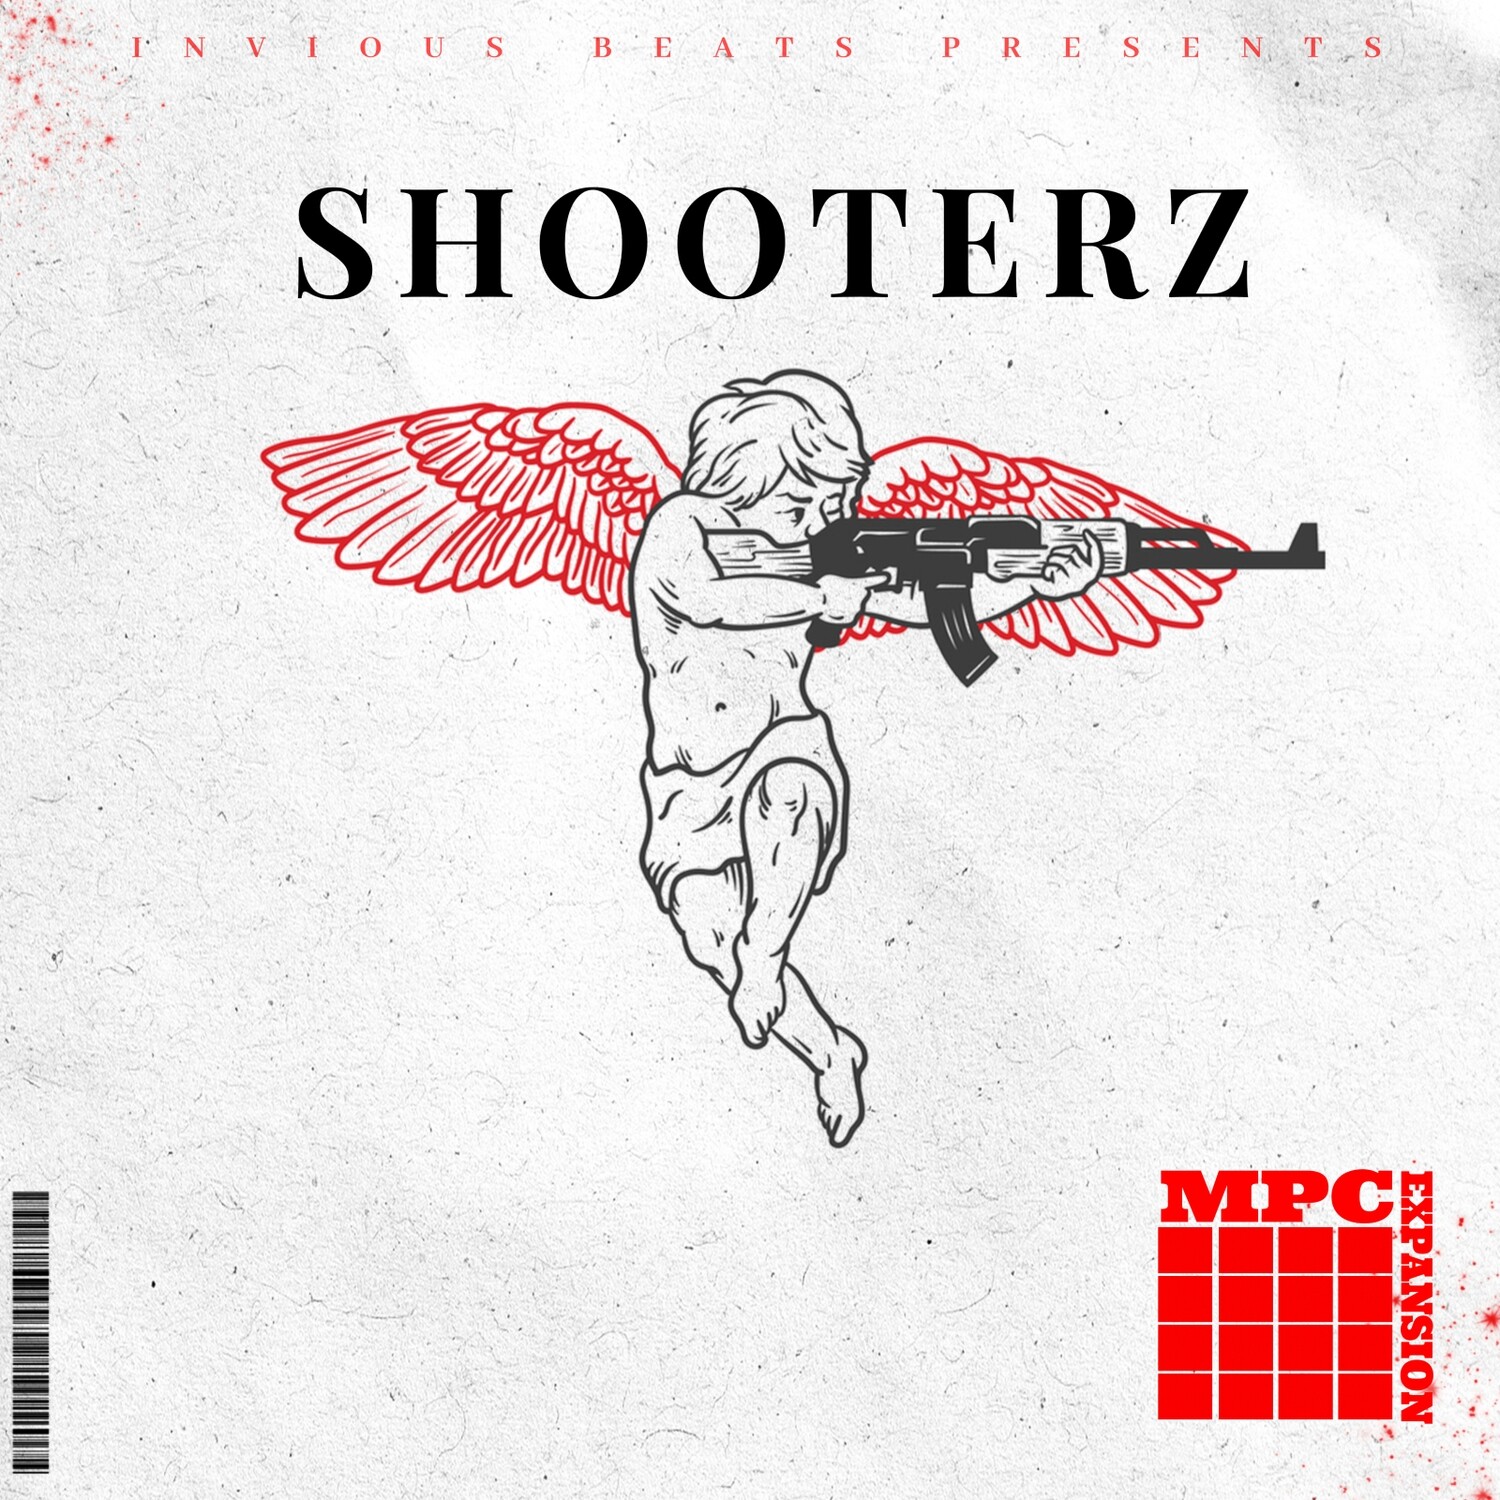 MPC EXPANSION 'SHOOTERZ' by INVIOUS